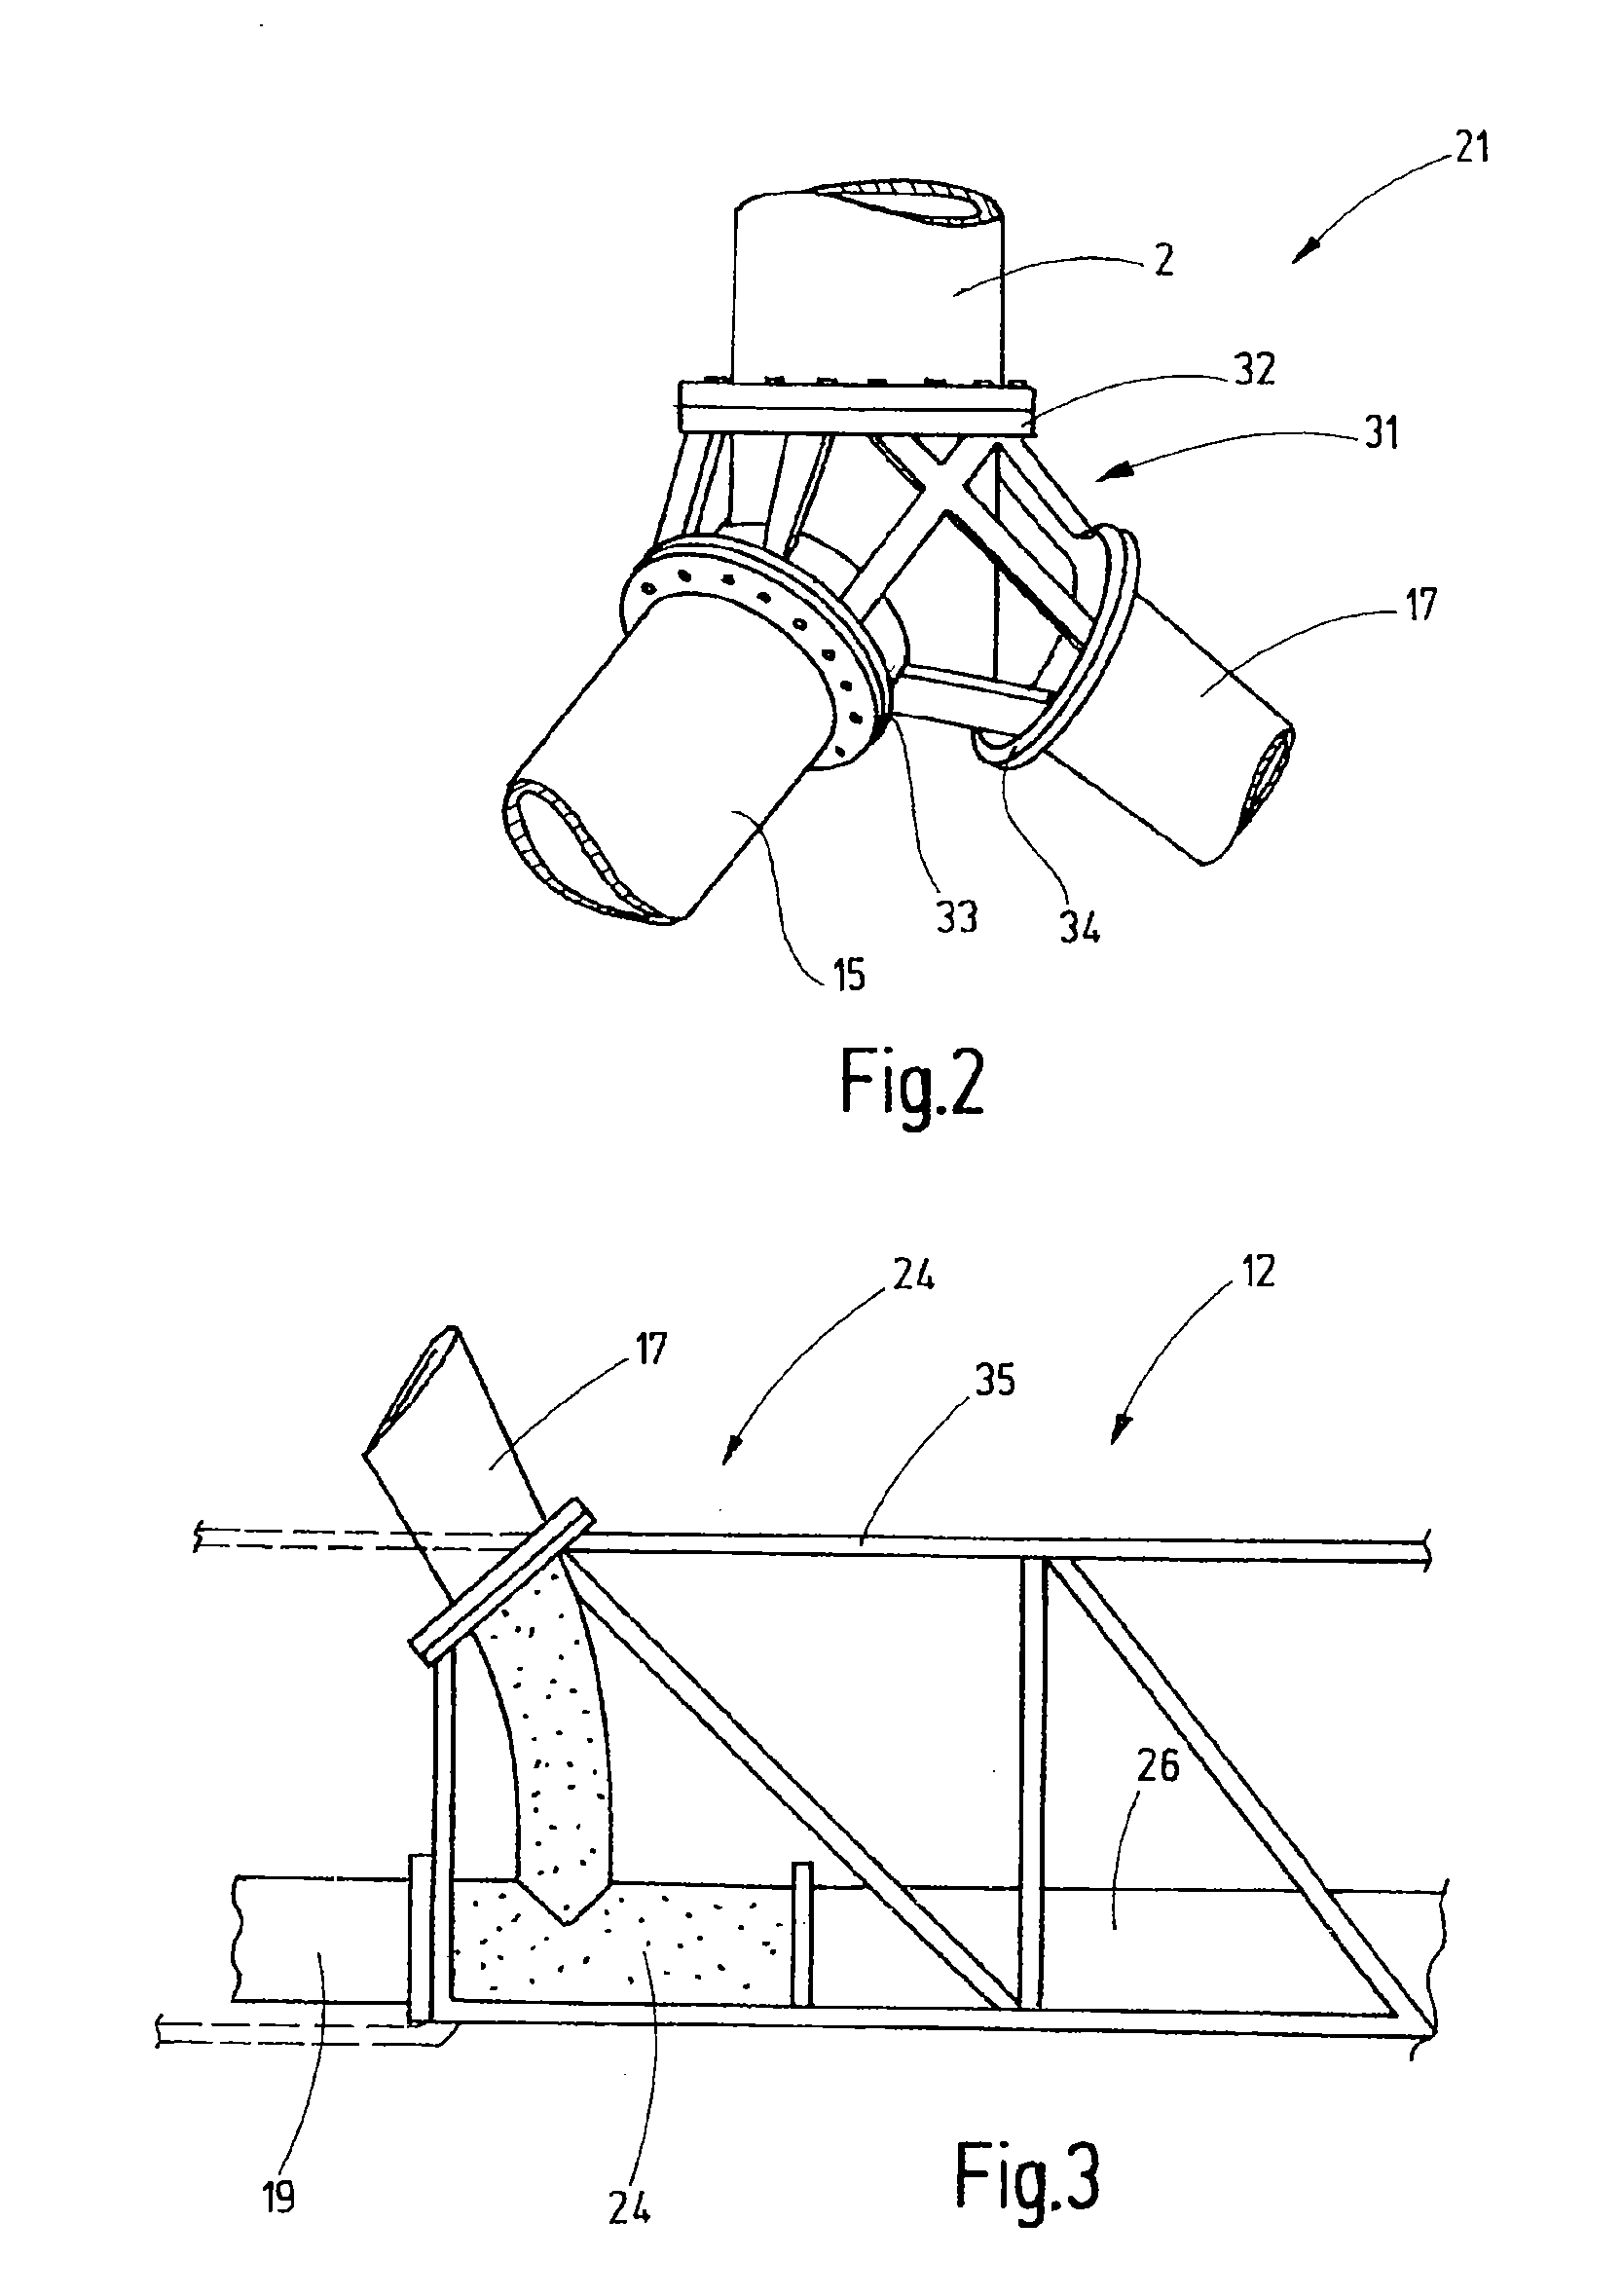 Floating foundation supporting framework with buoyancy components, having an open-relief design